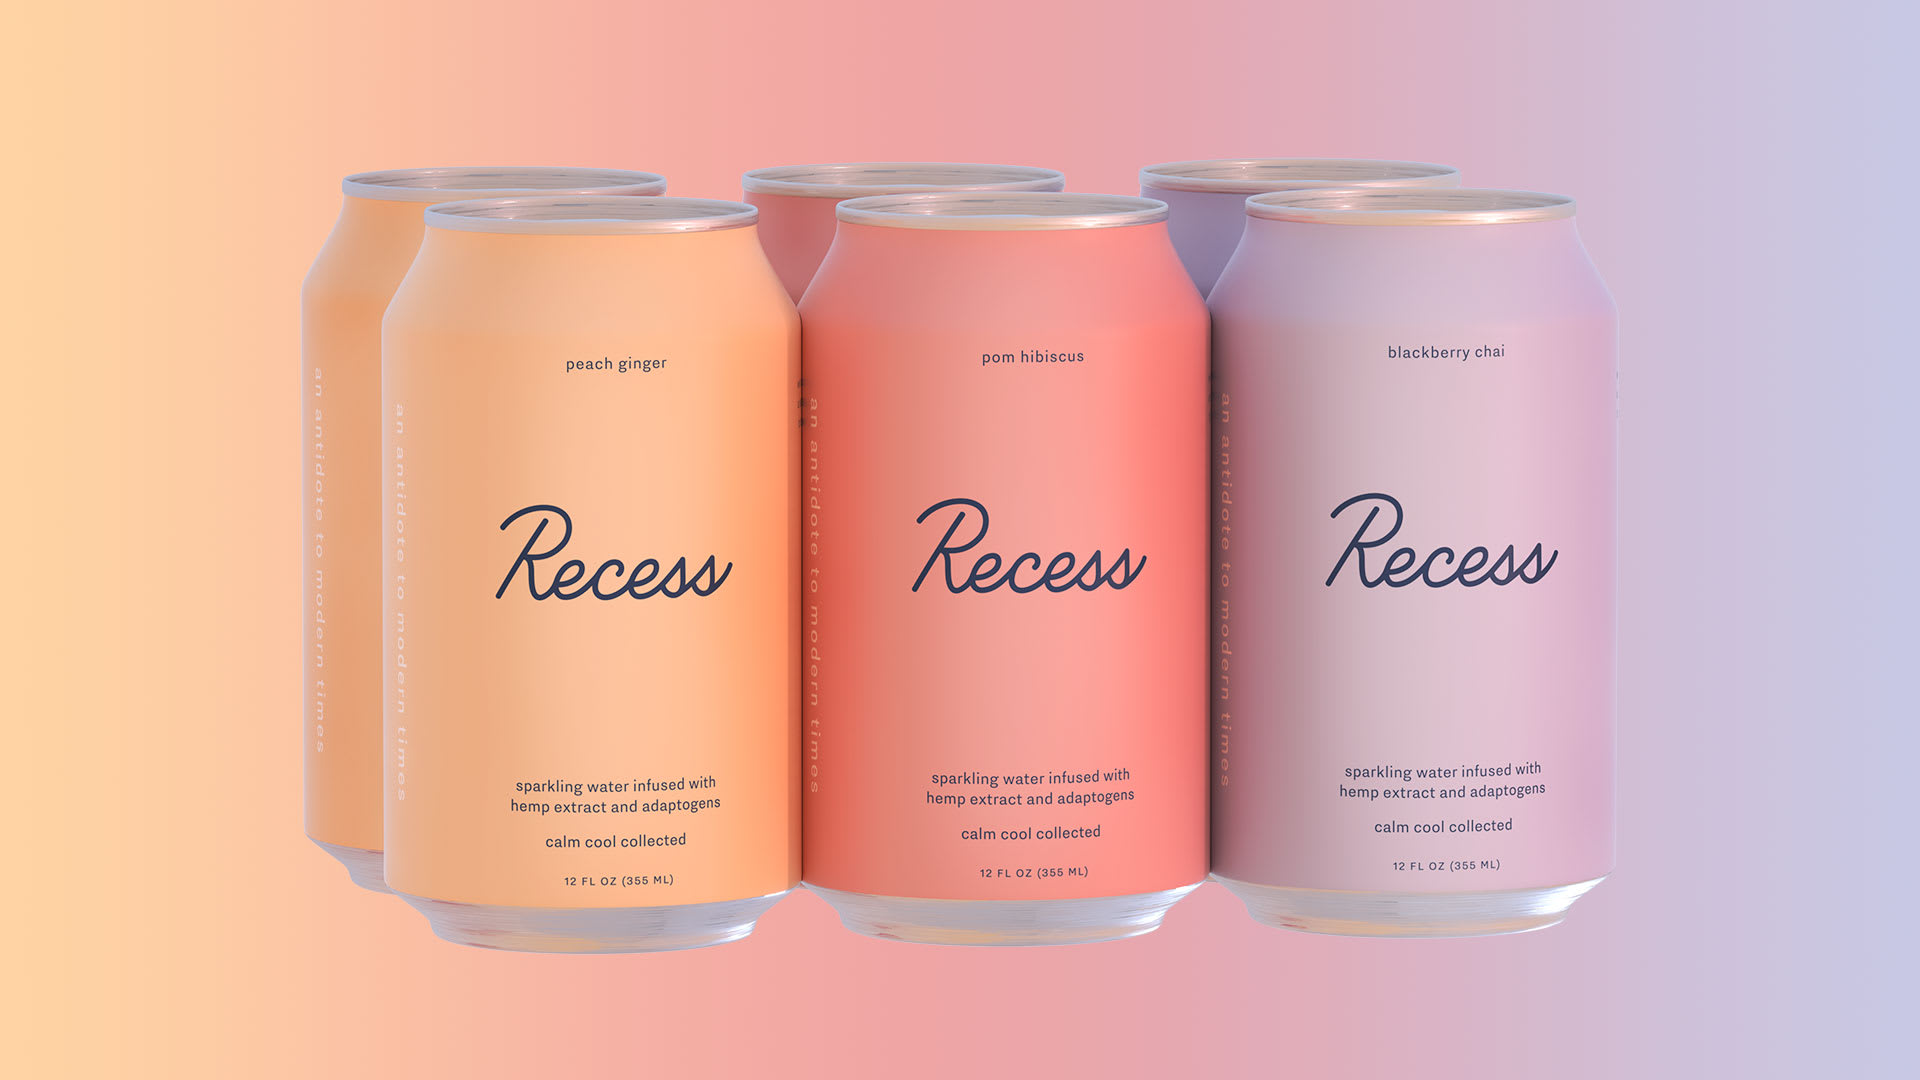 The LaCroix of cannabis? The marijuana market bets on beverages